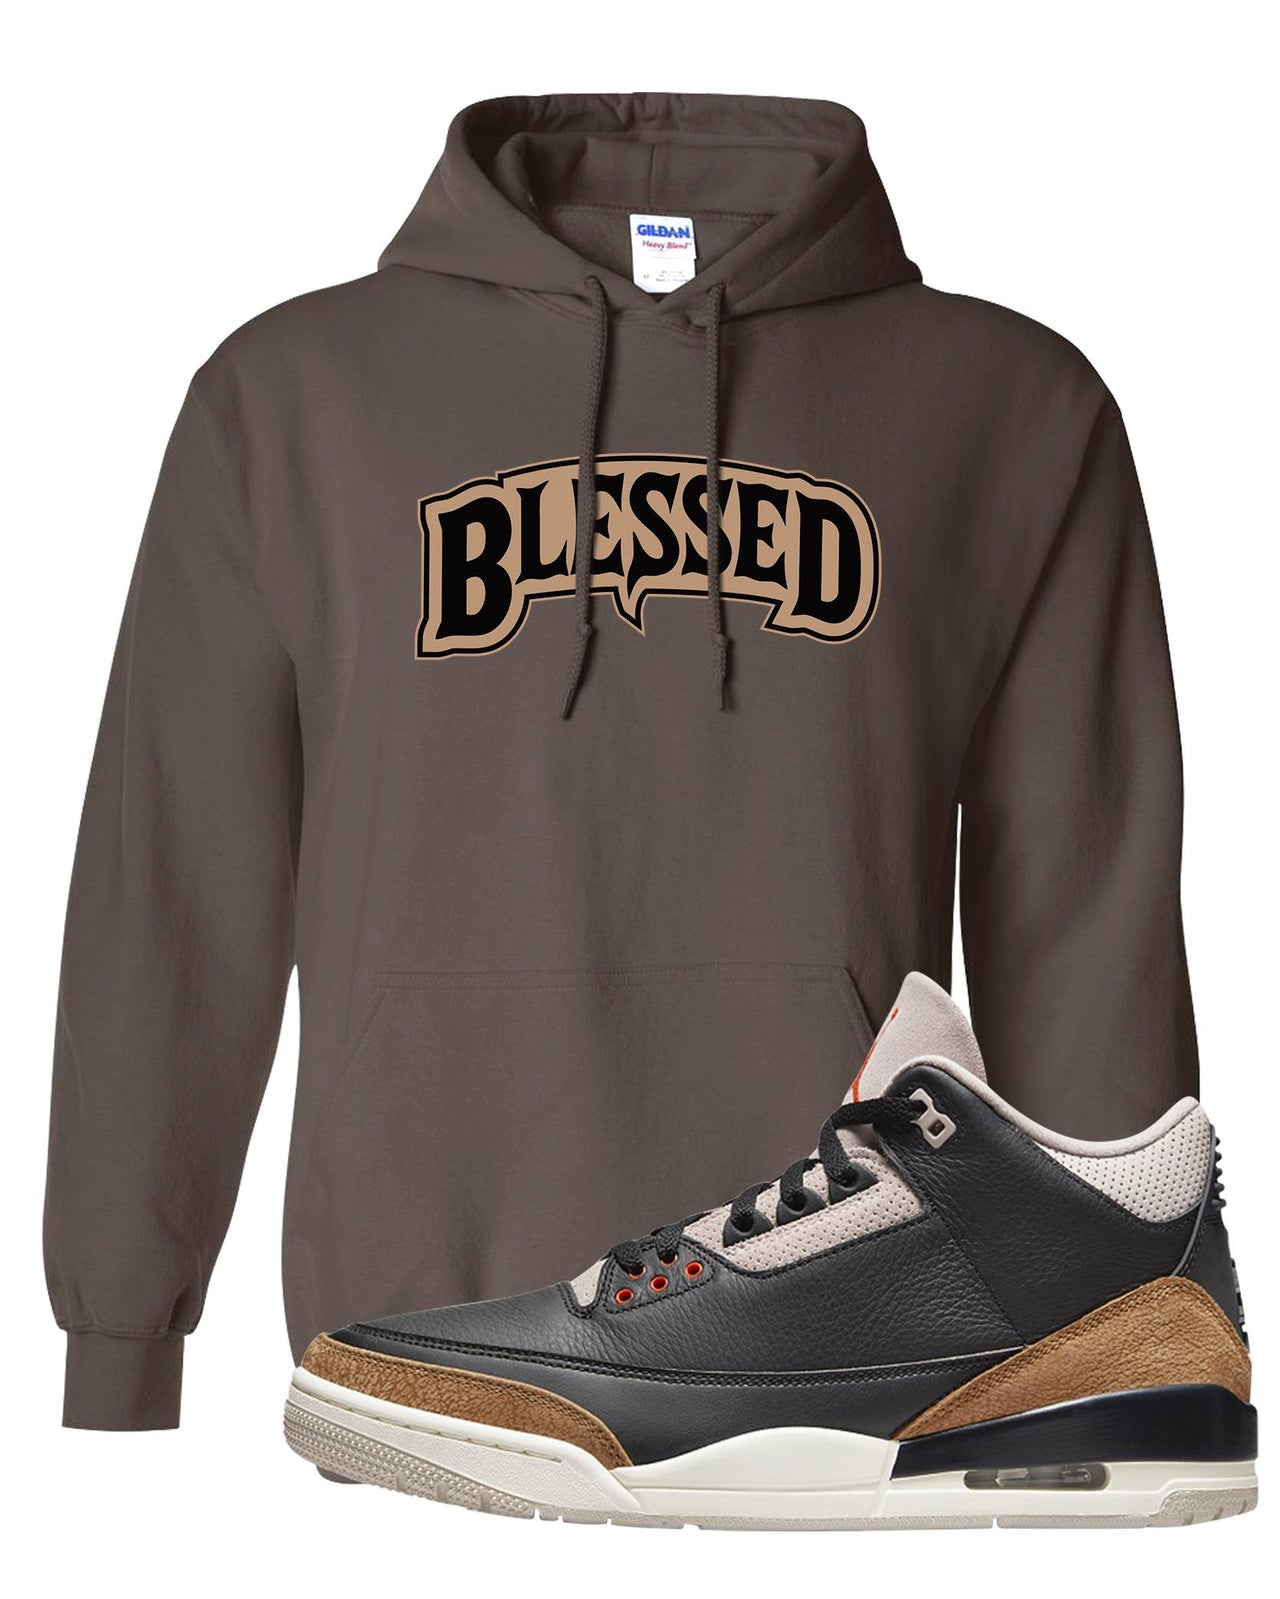 Desert Elephant 3s Hoodie | Blessed Arch, Chocolate